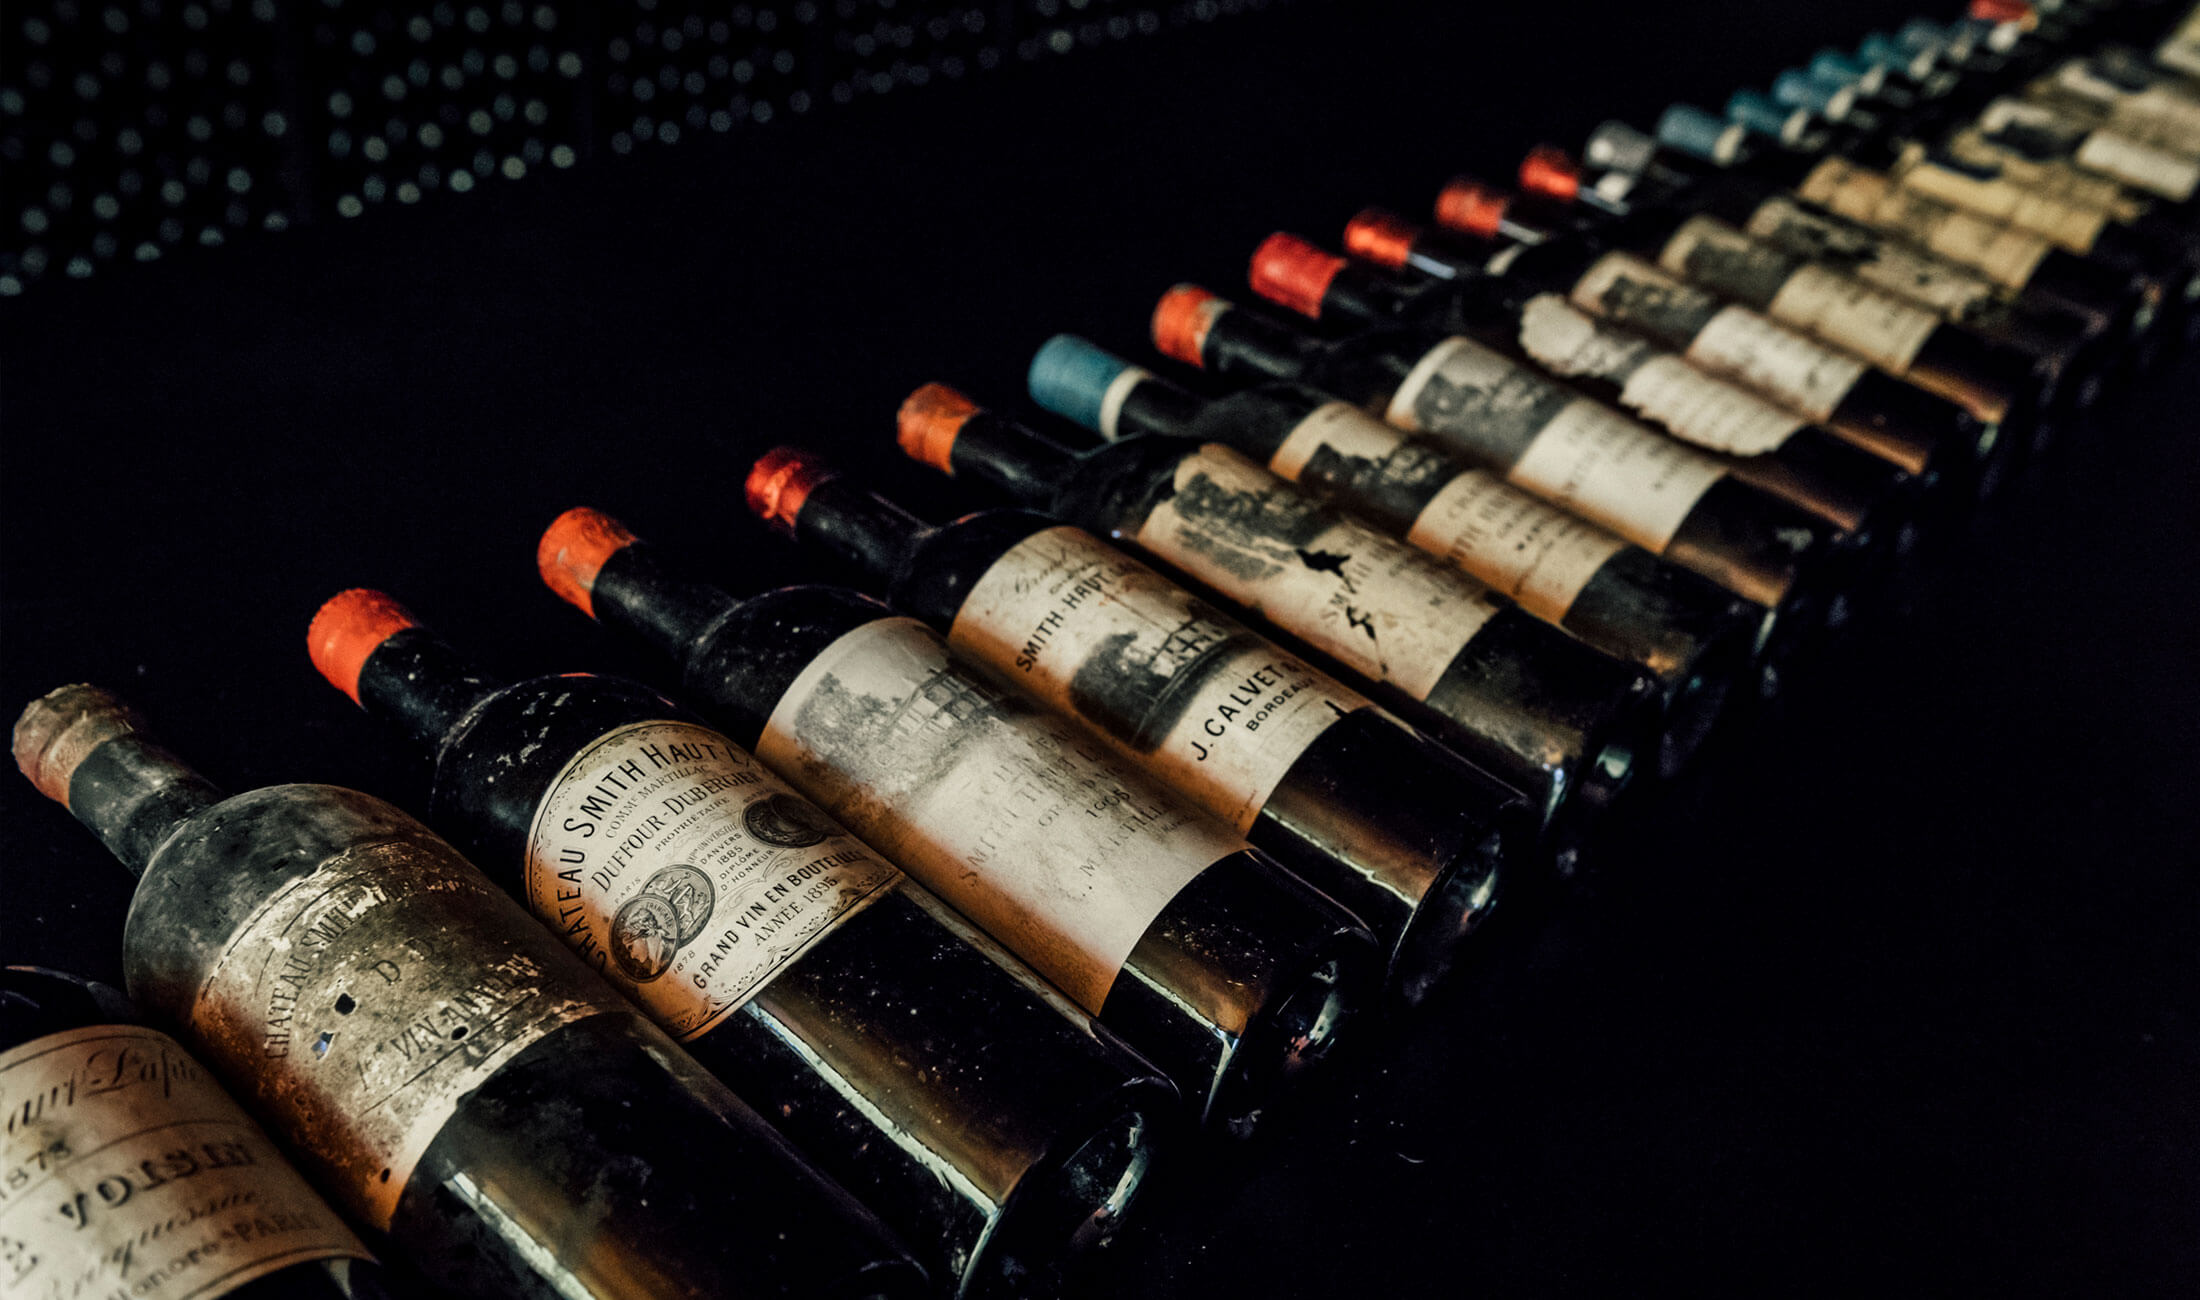 Vintage fine wines lined up in a cellar in France